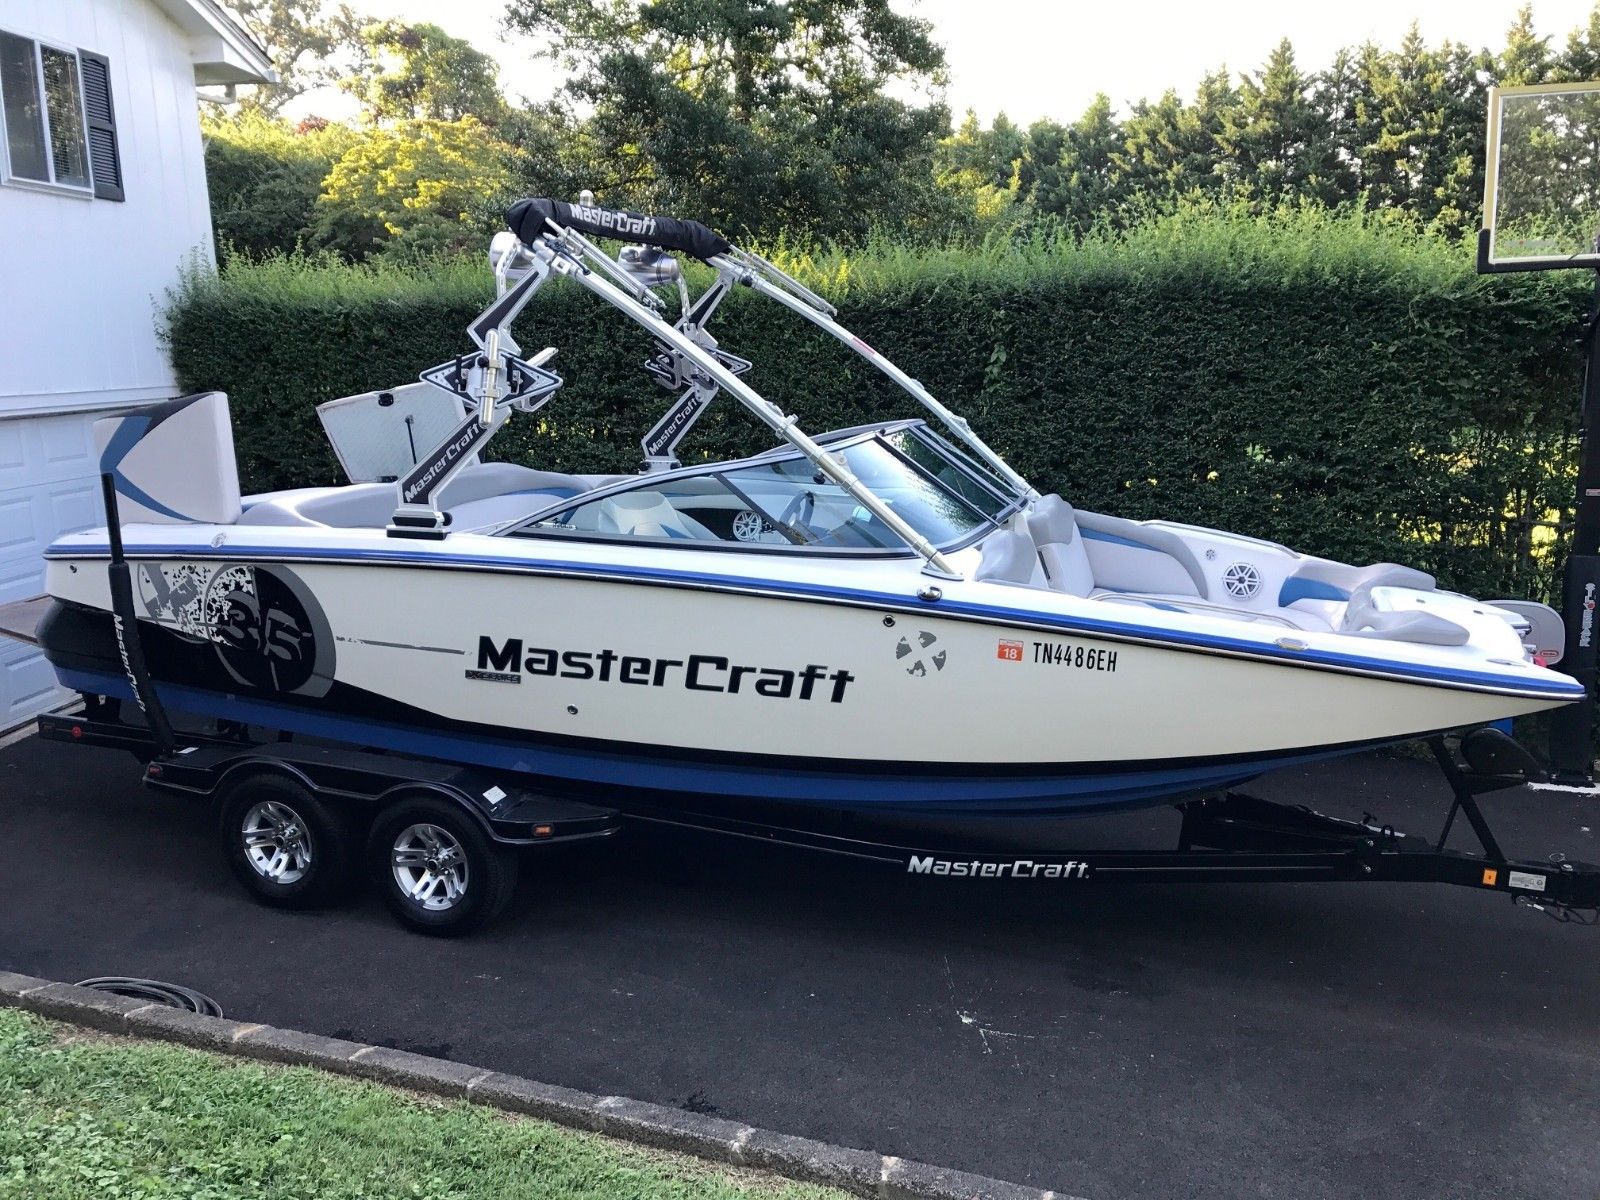 Mastercraft X35 2009 for sale for $56,500 - Boats-from-USA.com